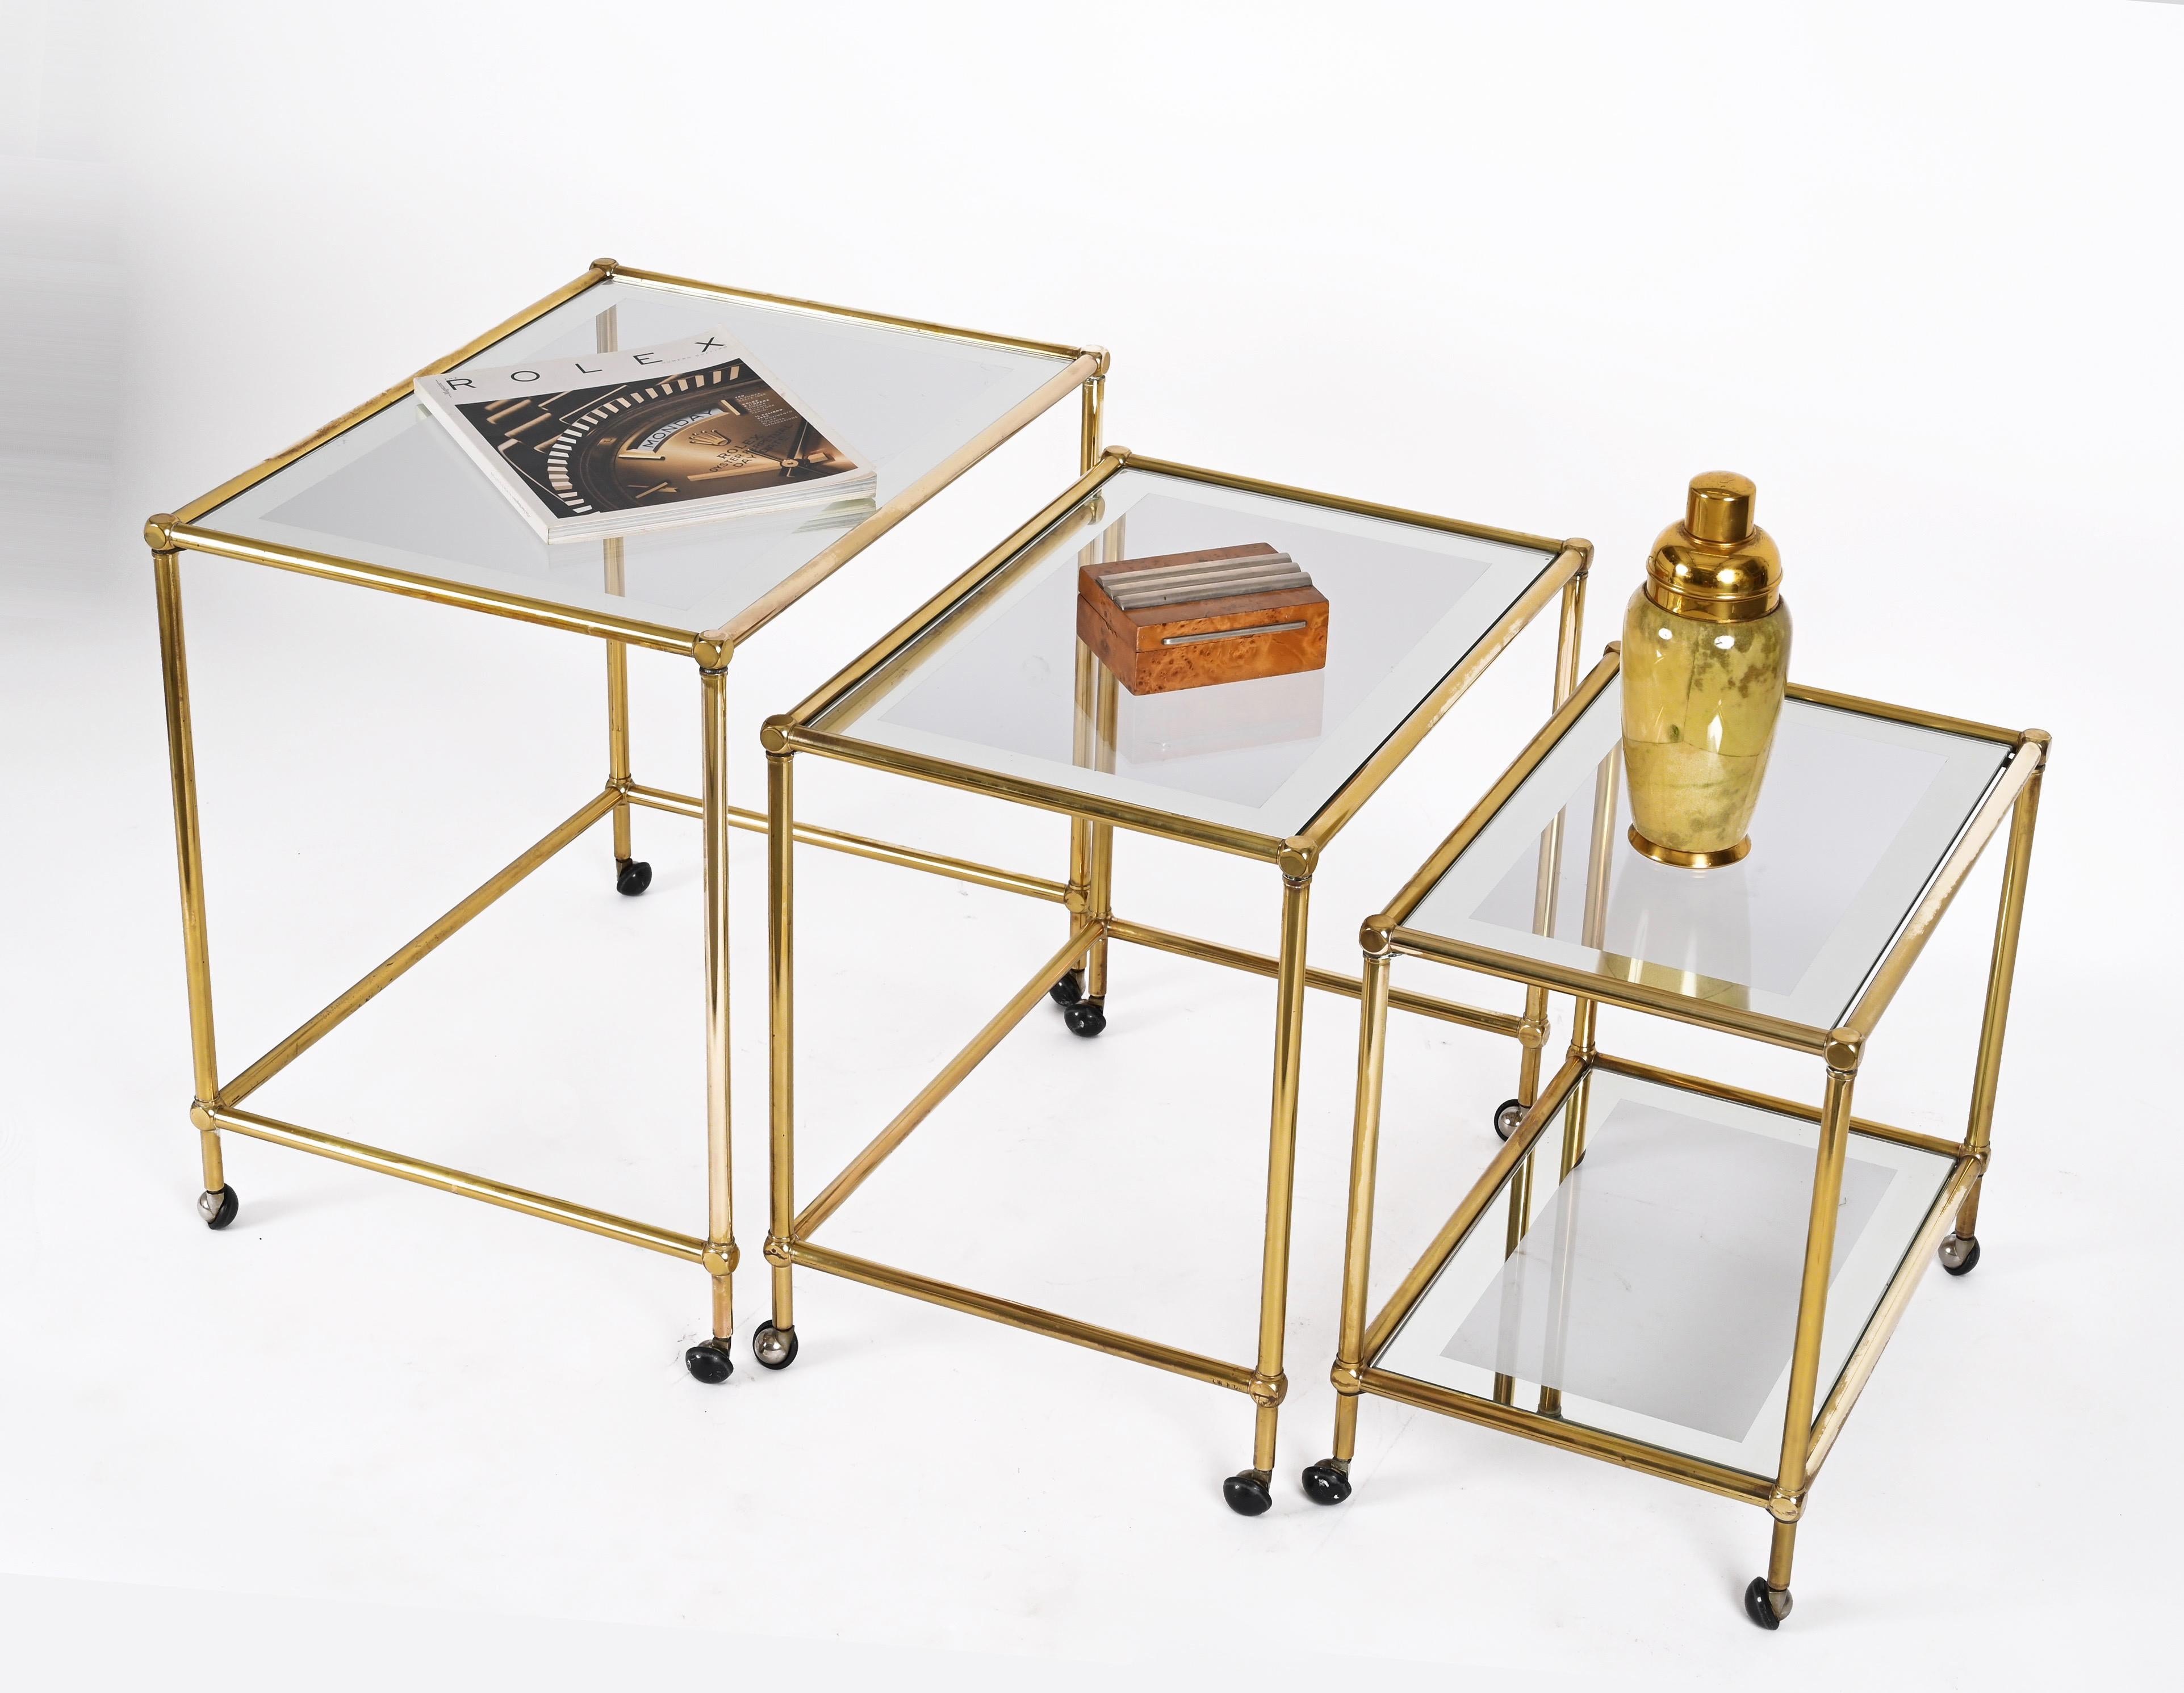 Set of Brass Mirrored Border with Glass Top Nesting Tables, Maison Jansen, 1970s For Sale 1